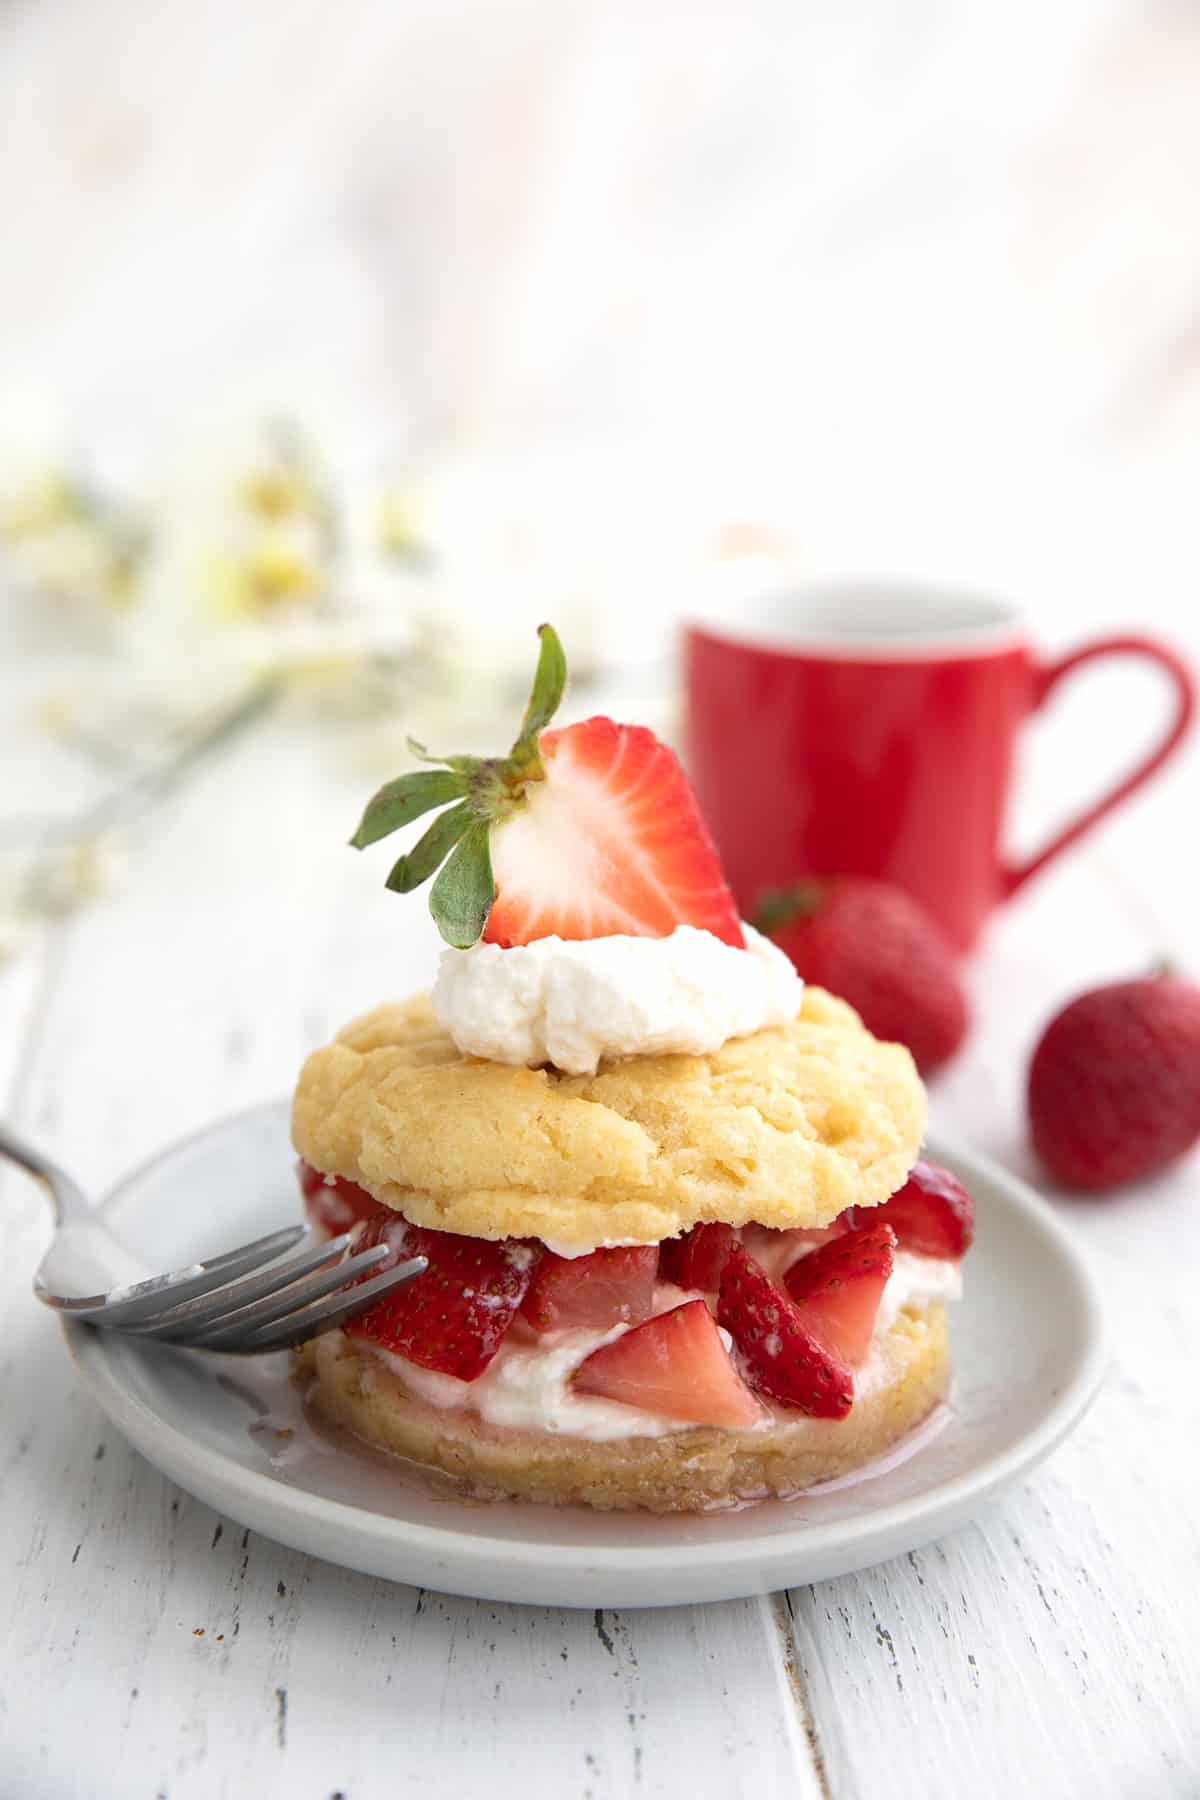 Keto Strawberry Shortcake on a white wooden table with a red cup of coffee in the background.